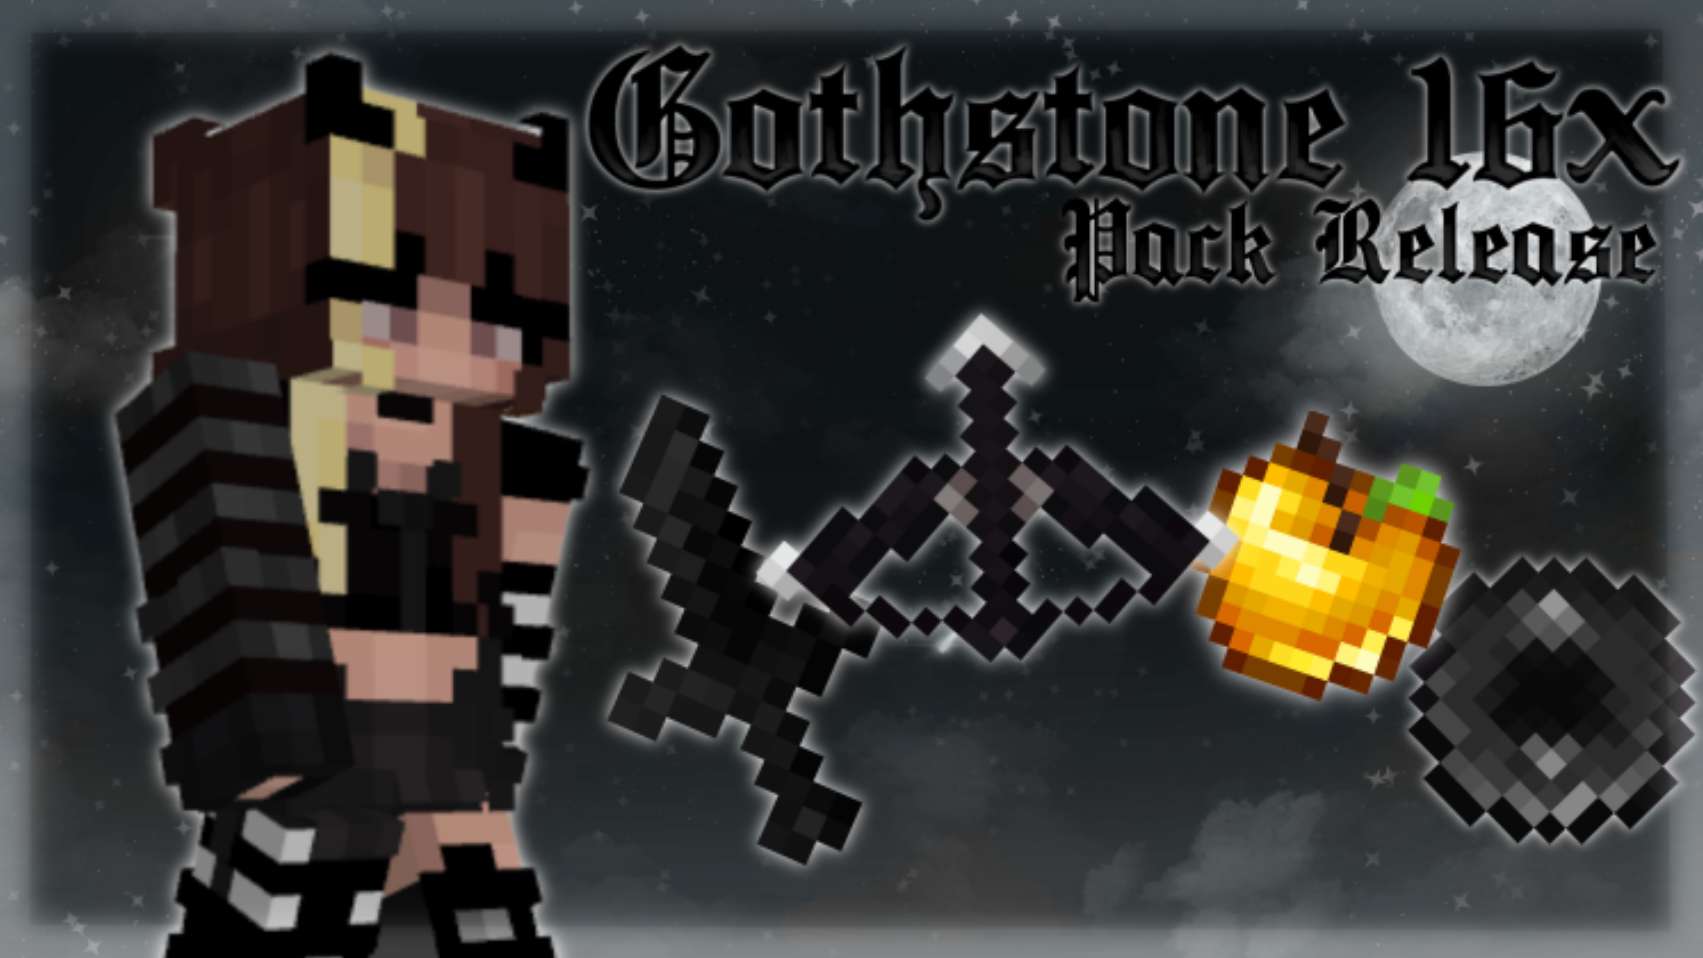 gothstone 16 by oVamp on PvPRP